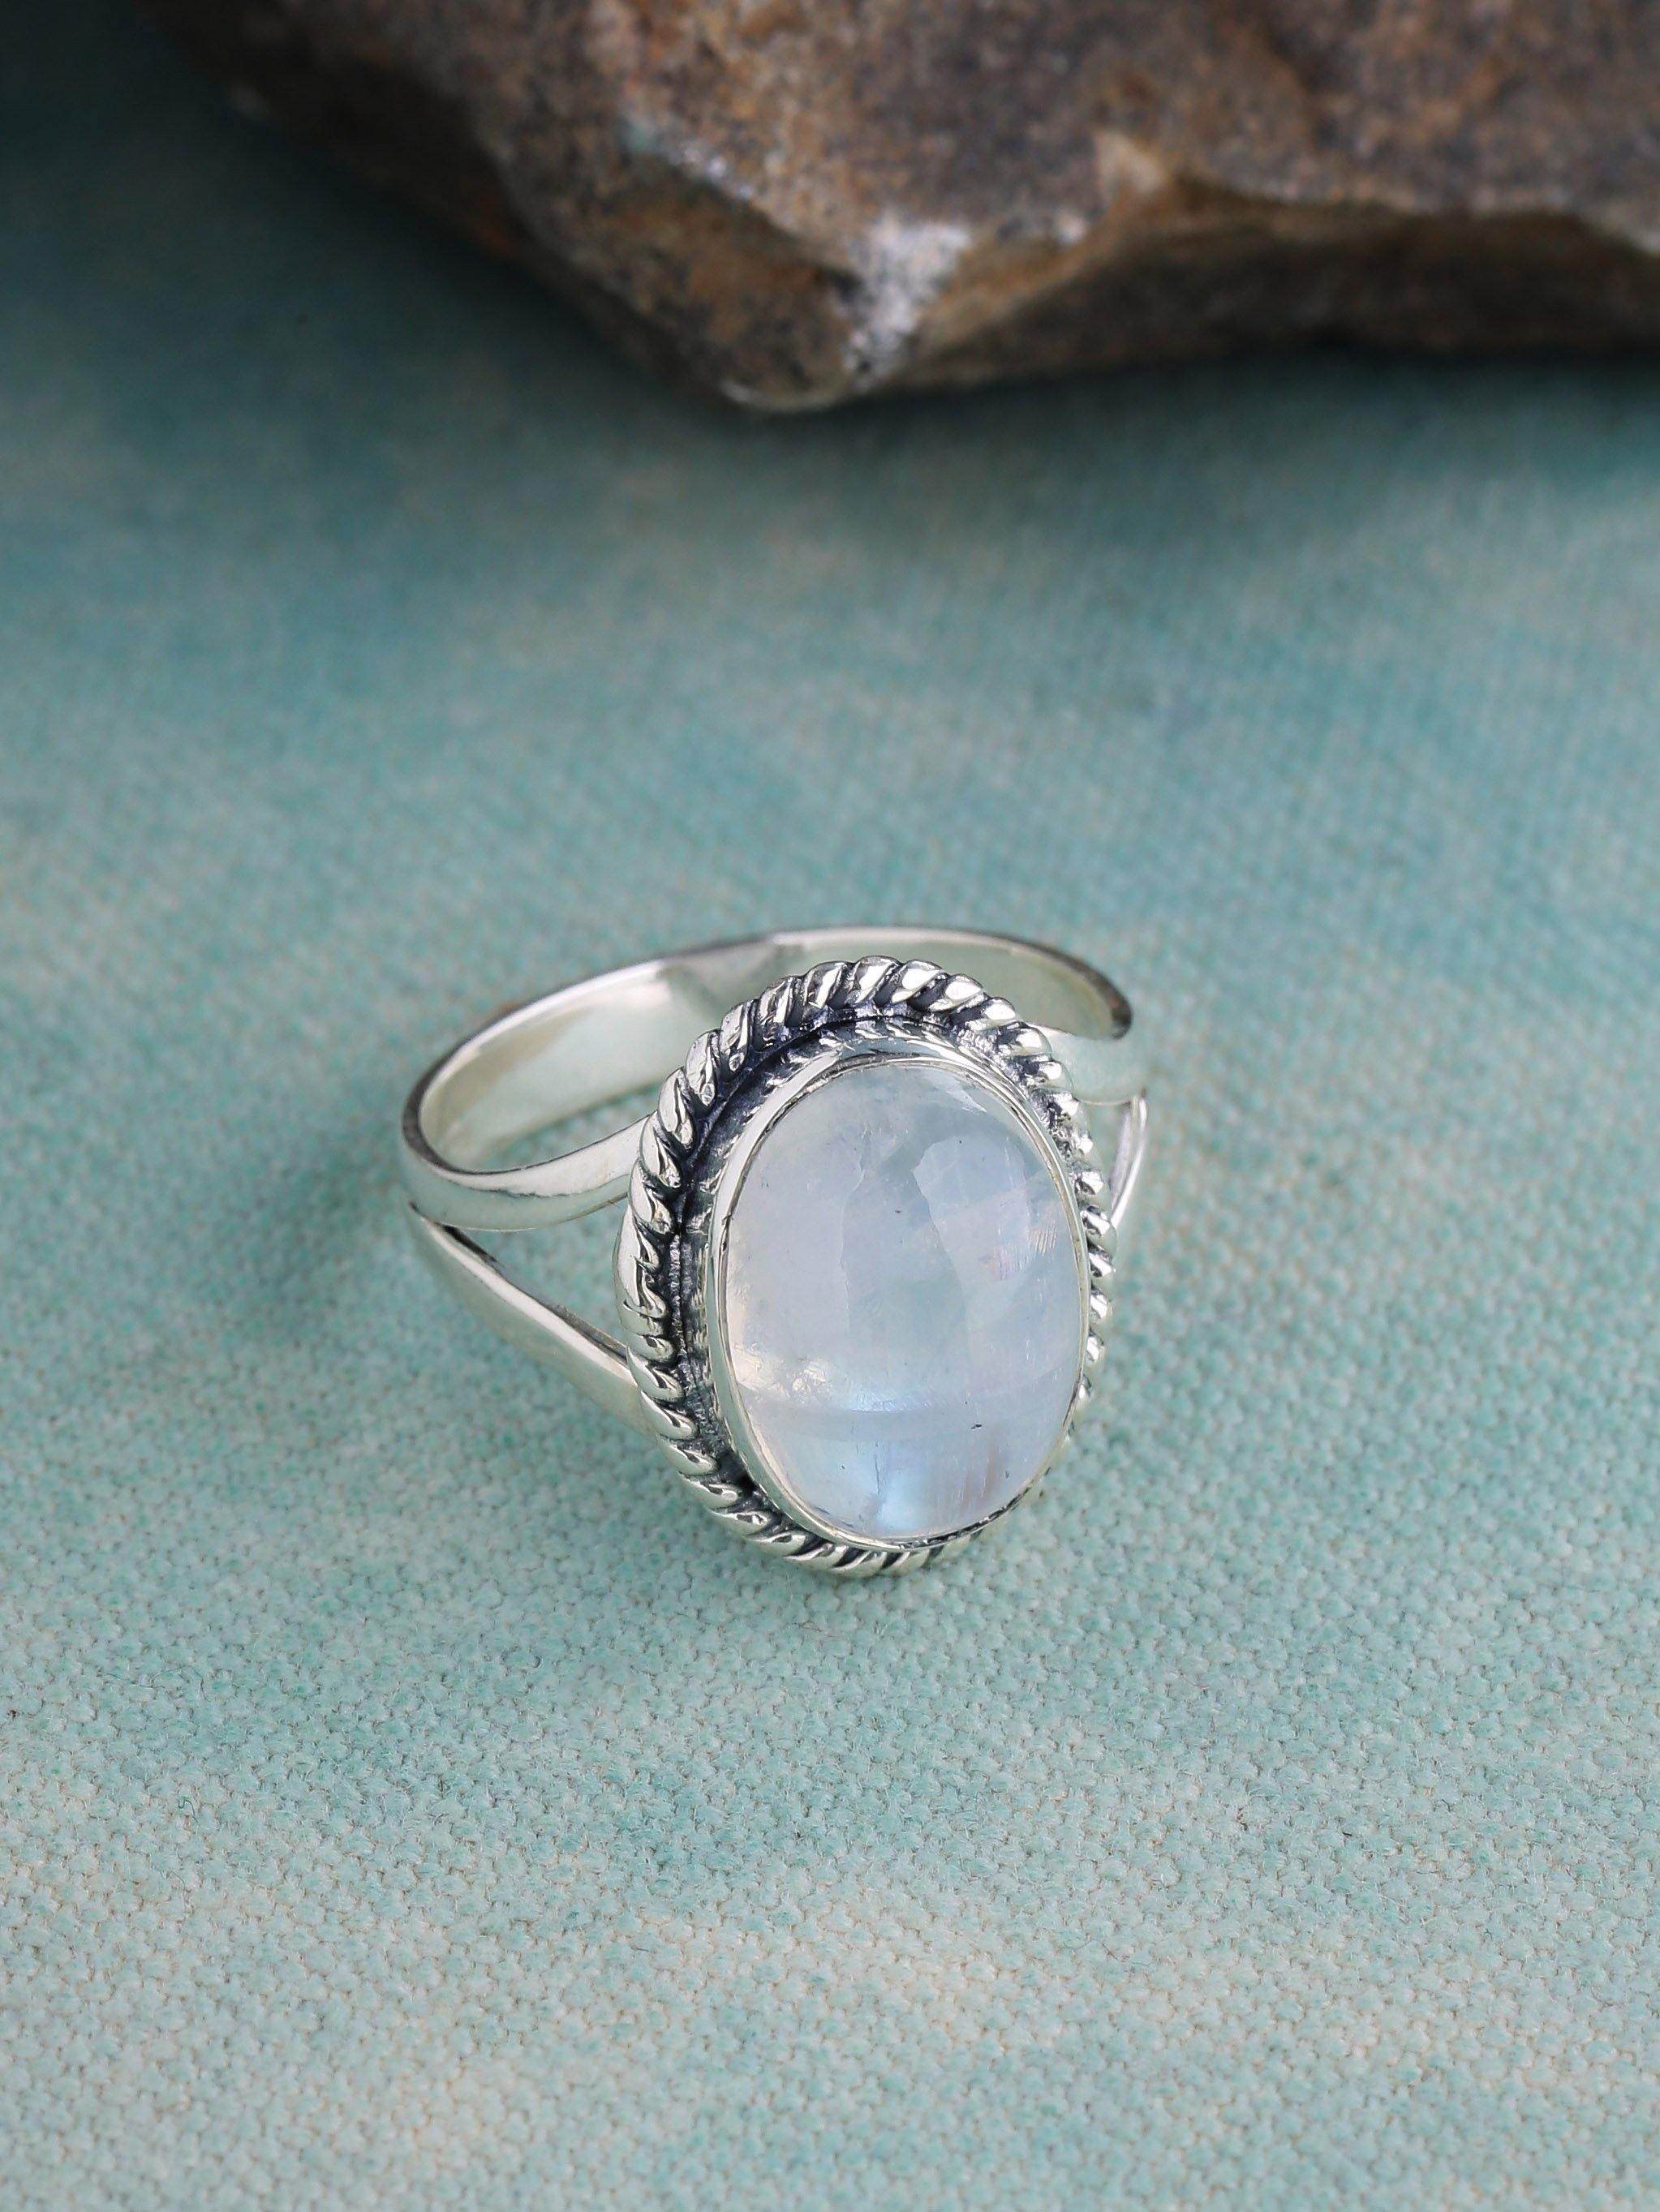 Moonstone Ring Solid 925 Sterling Silver Jewelry - YoTreasure